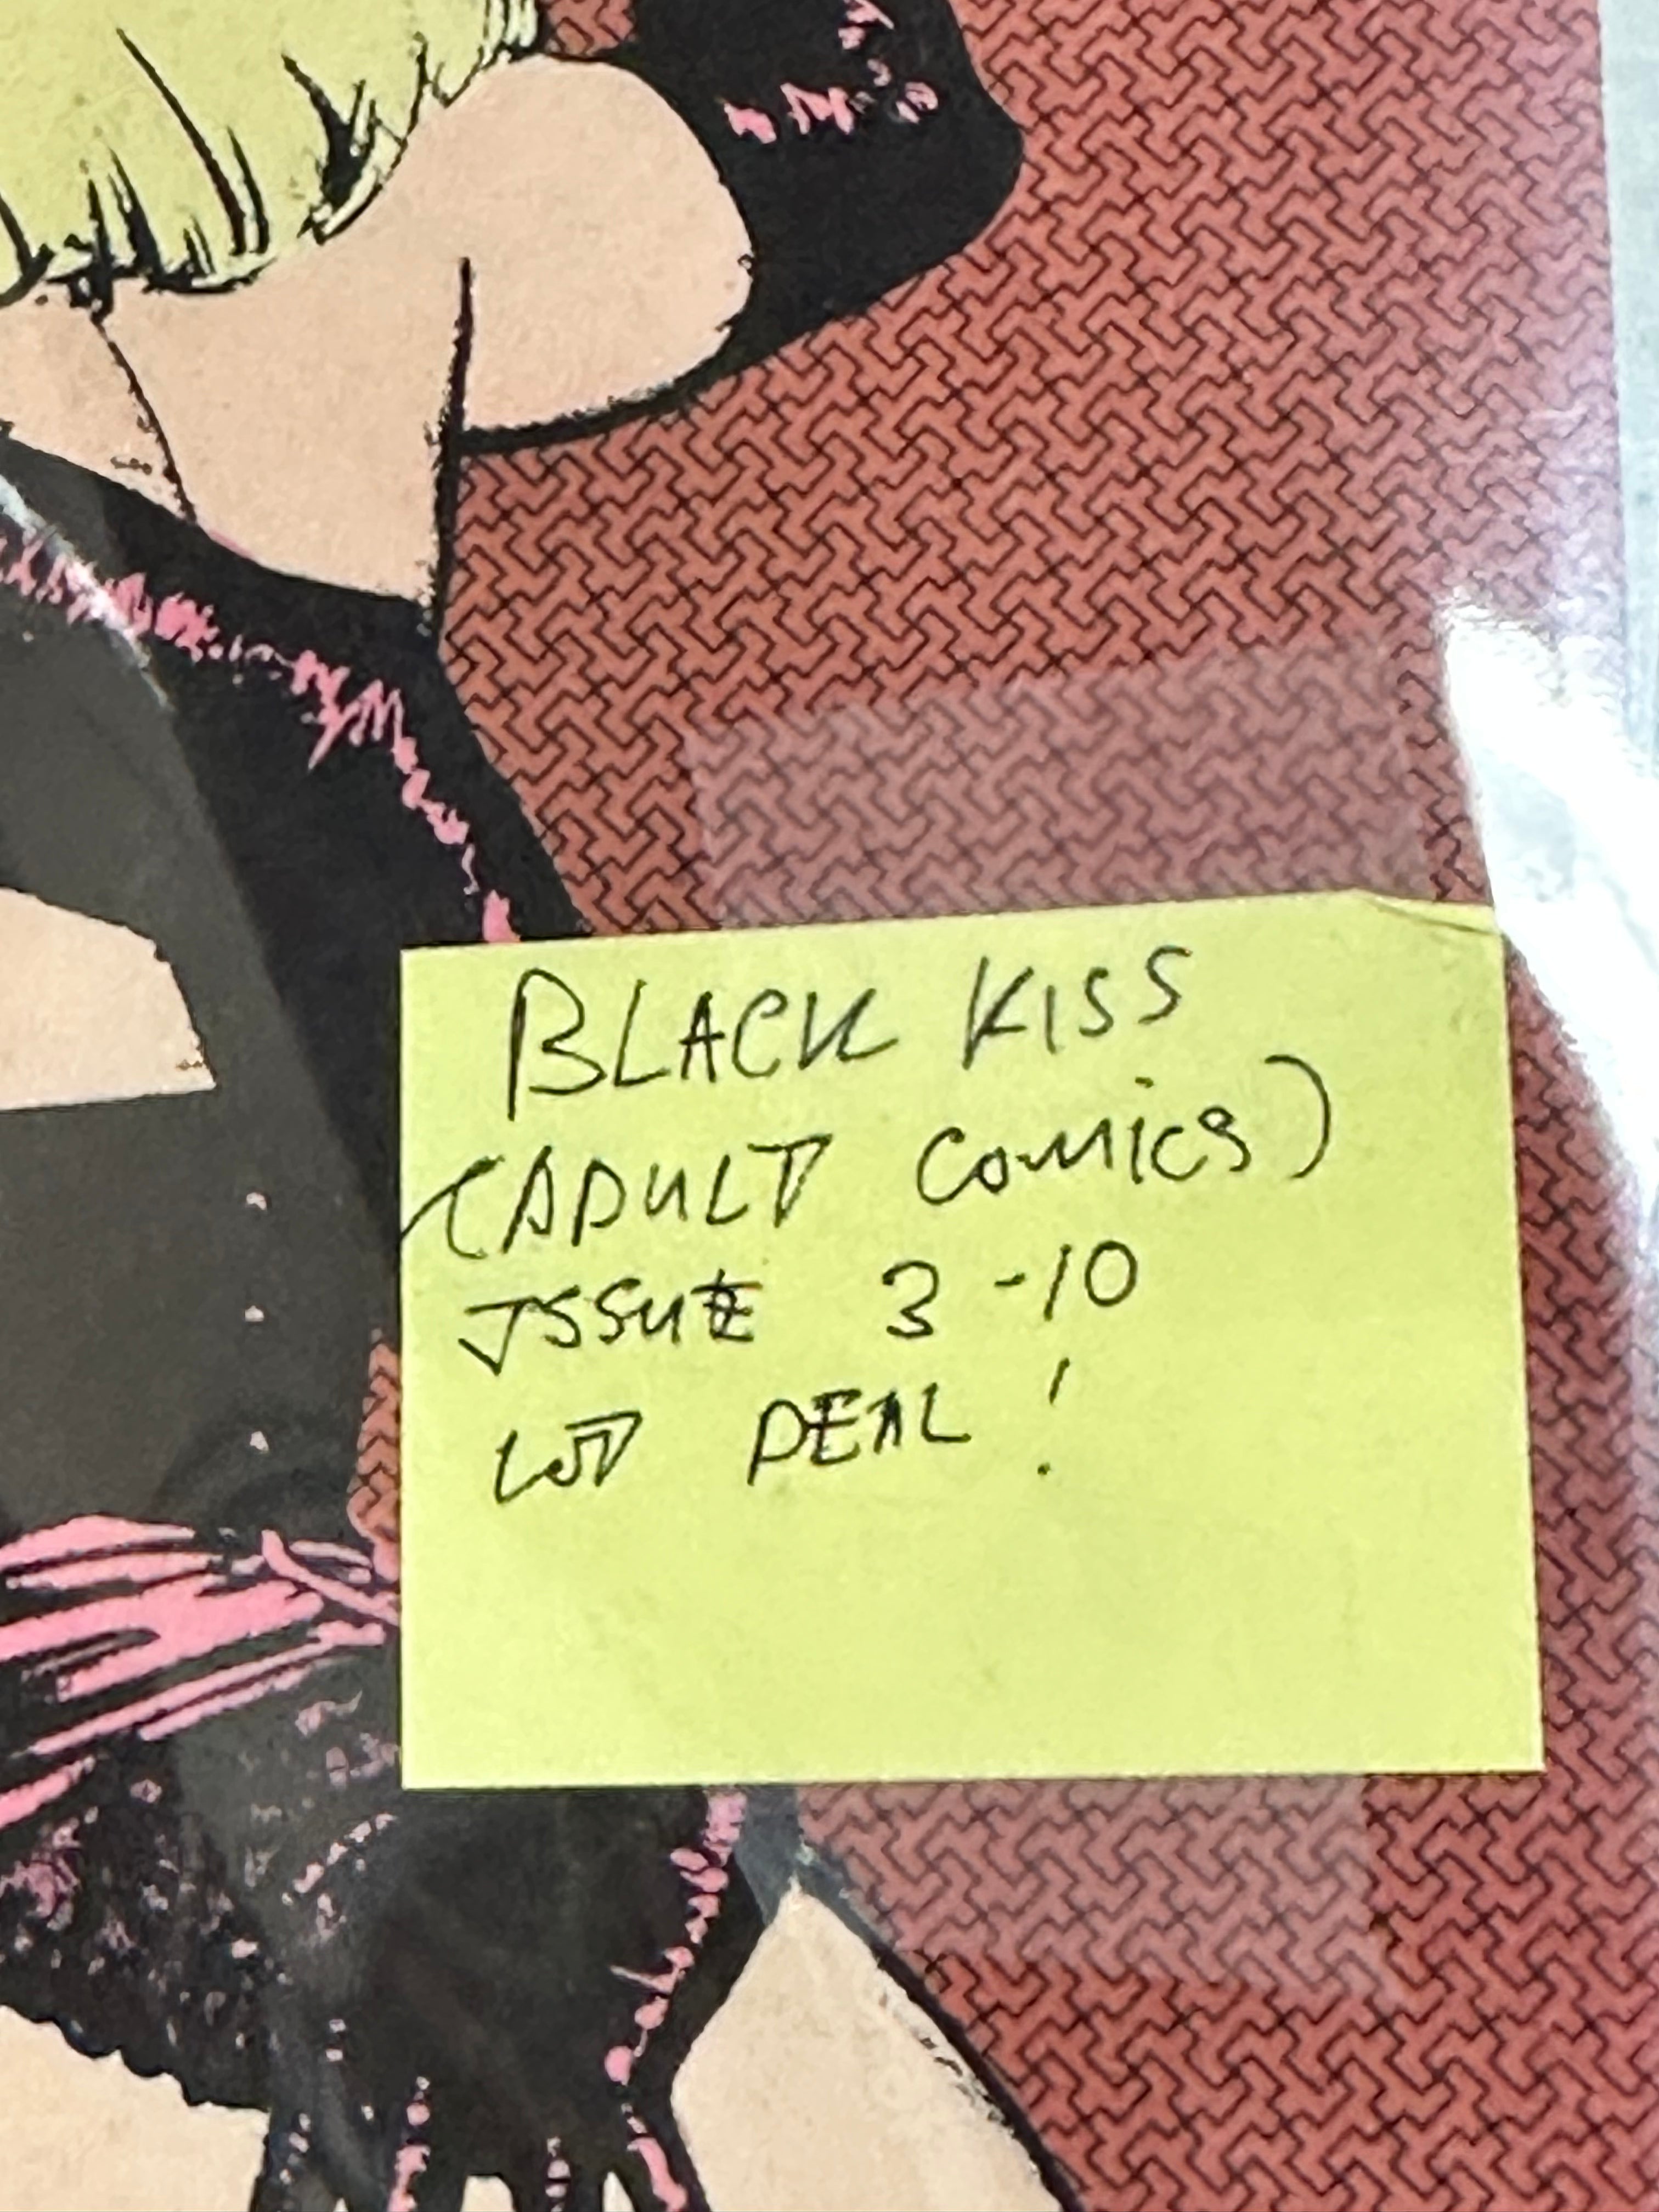 Black Kiss adult comic lot deal issues 3-10 from 1988